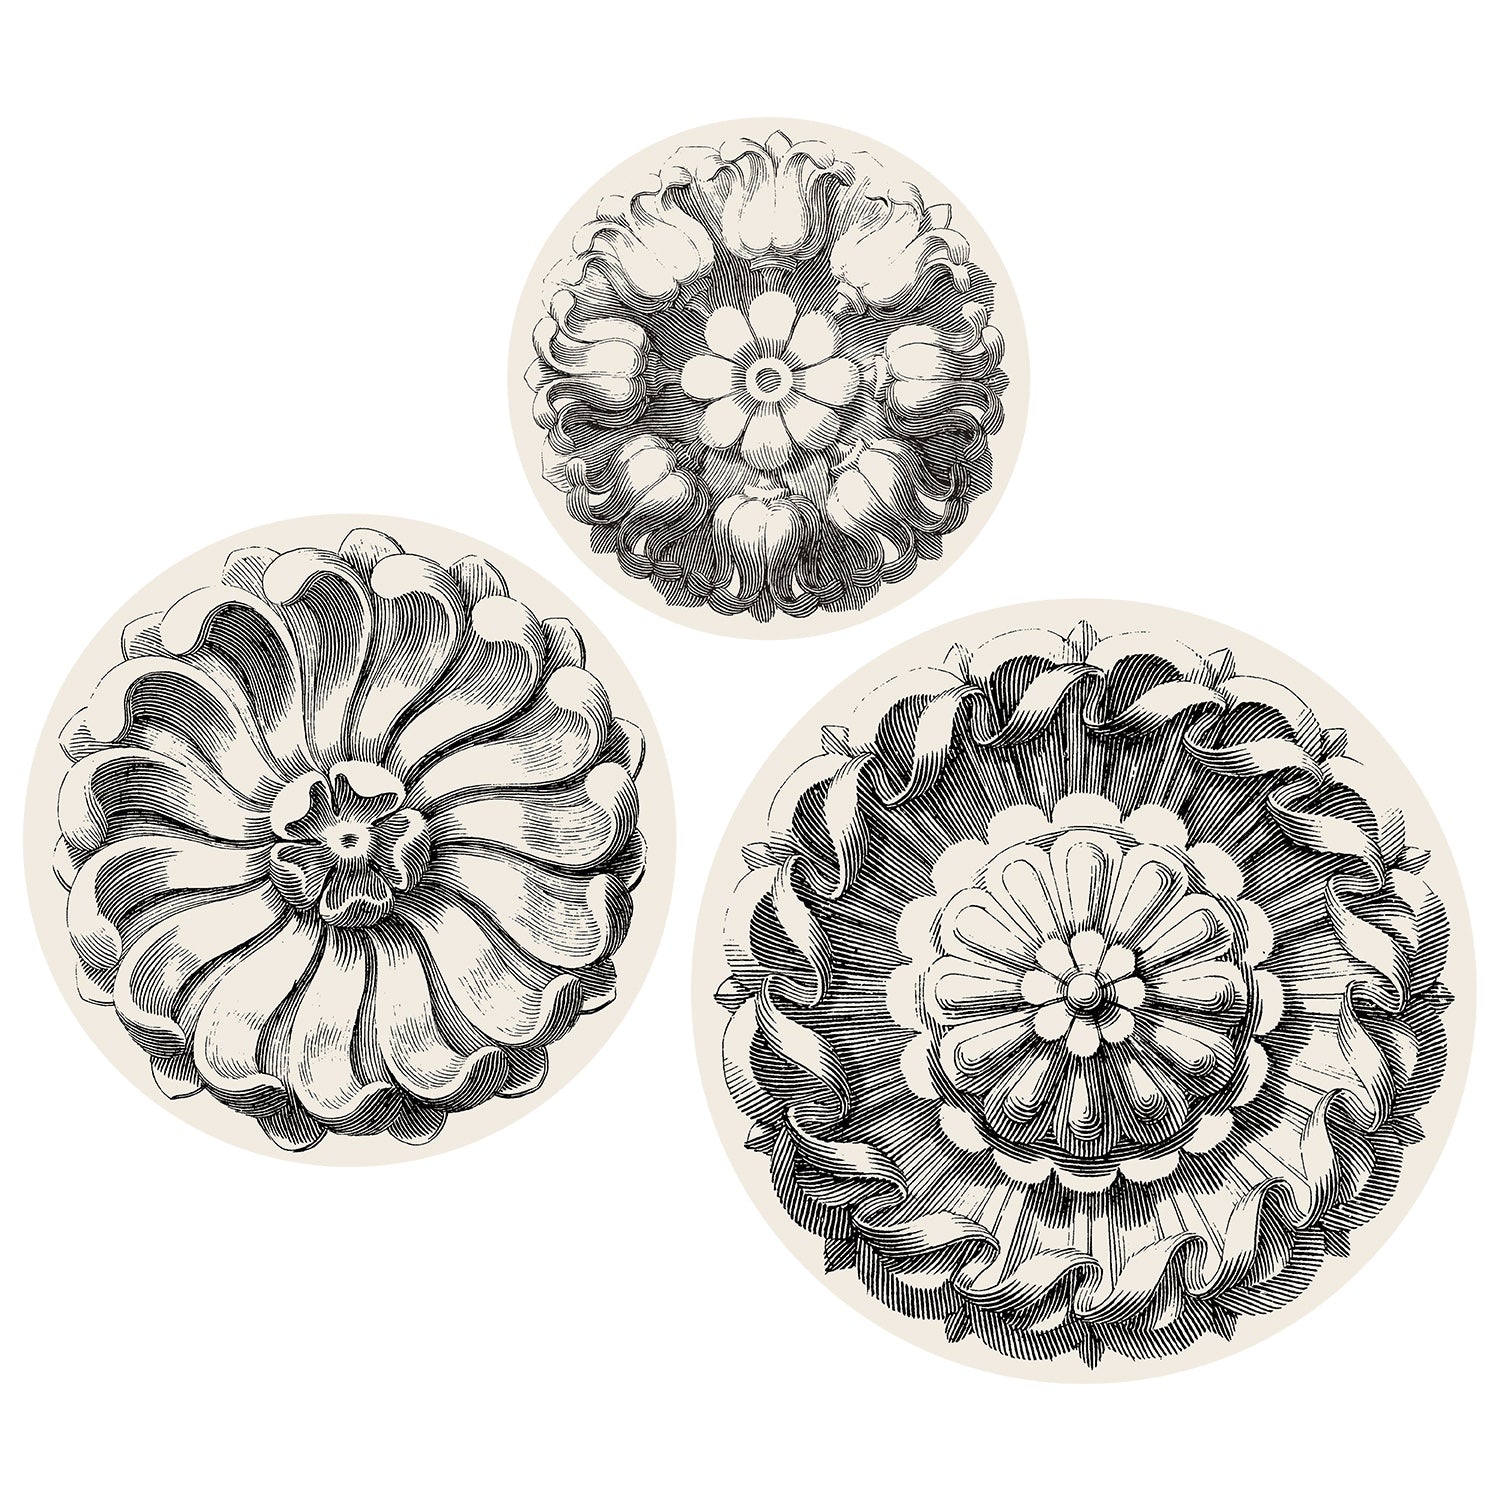 Three sizes of circular serving papers, each with a different engraving-style floral rosette design in black on white paper.